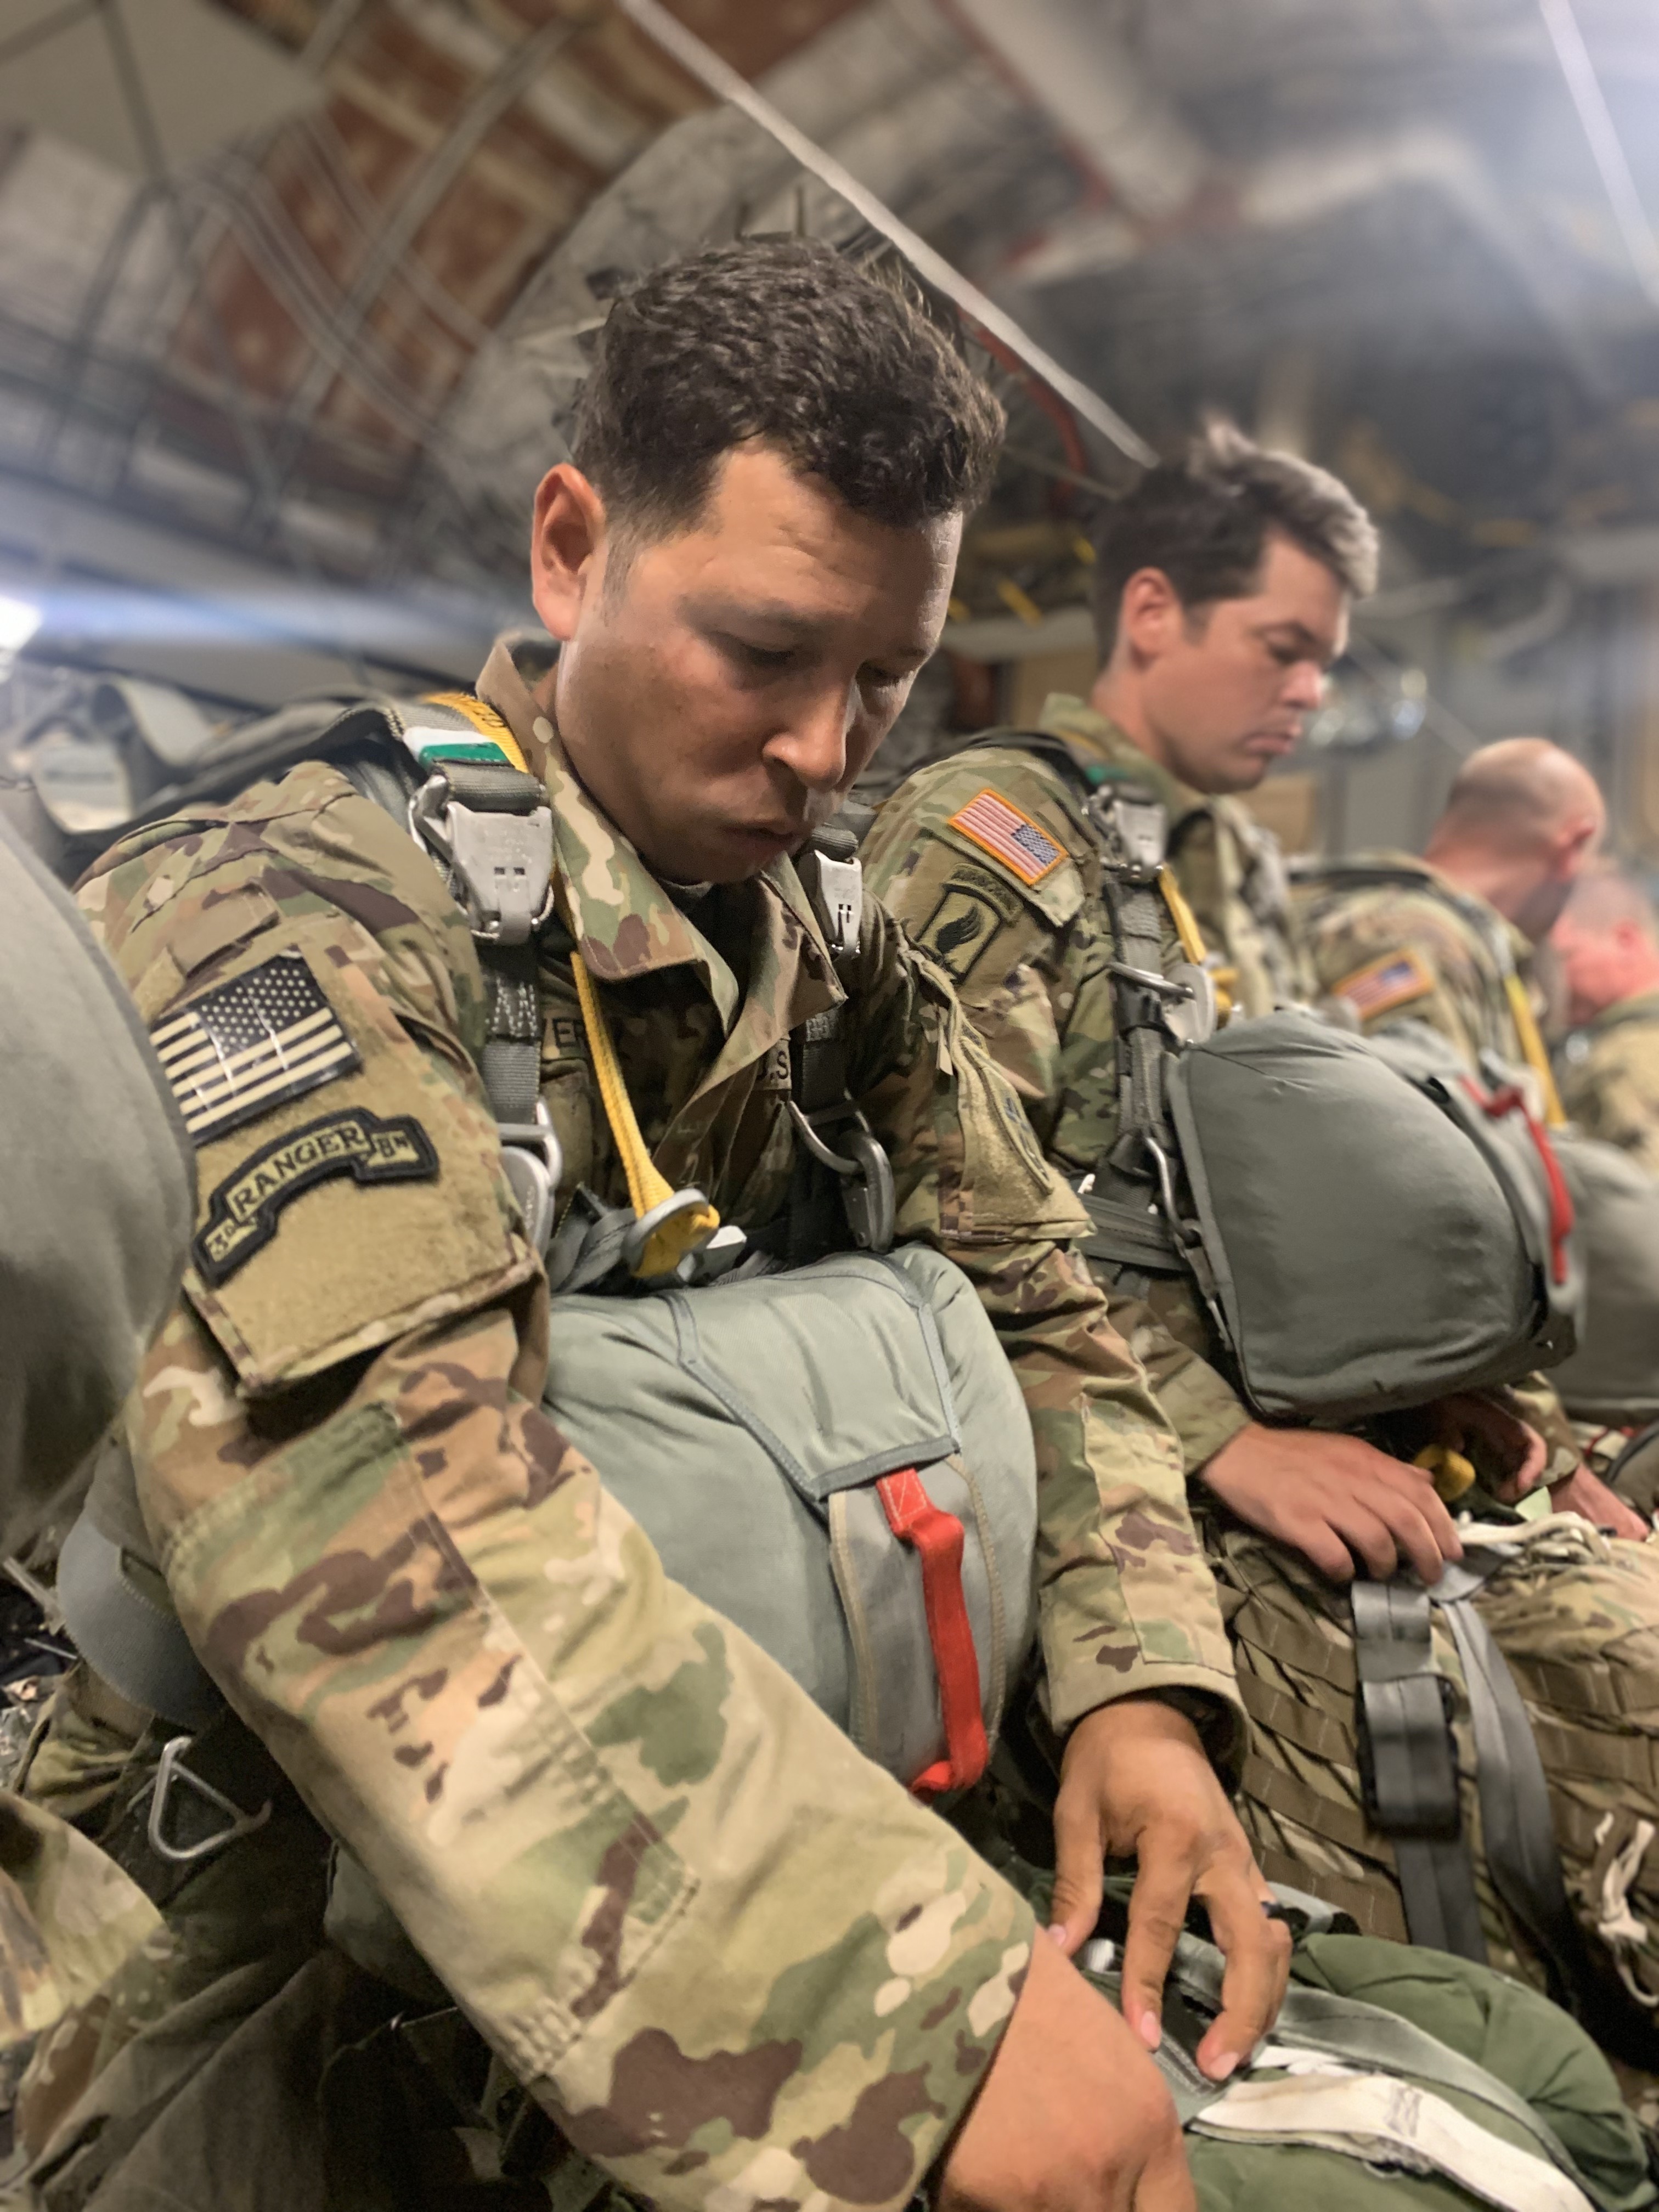 Ft. Bragg Airborne troops support R&D to prevent Soldier head injuries, Article